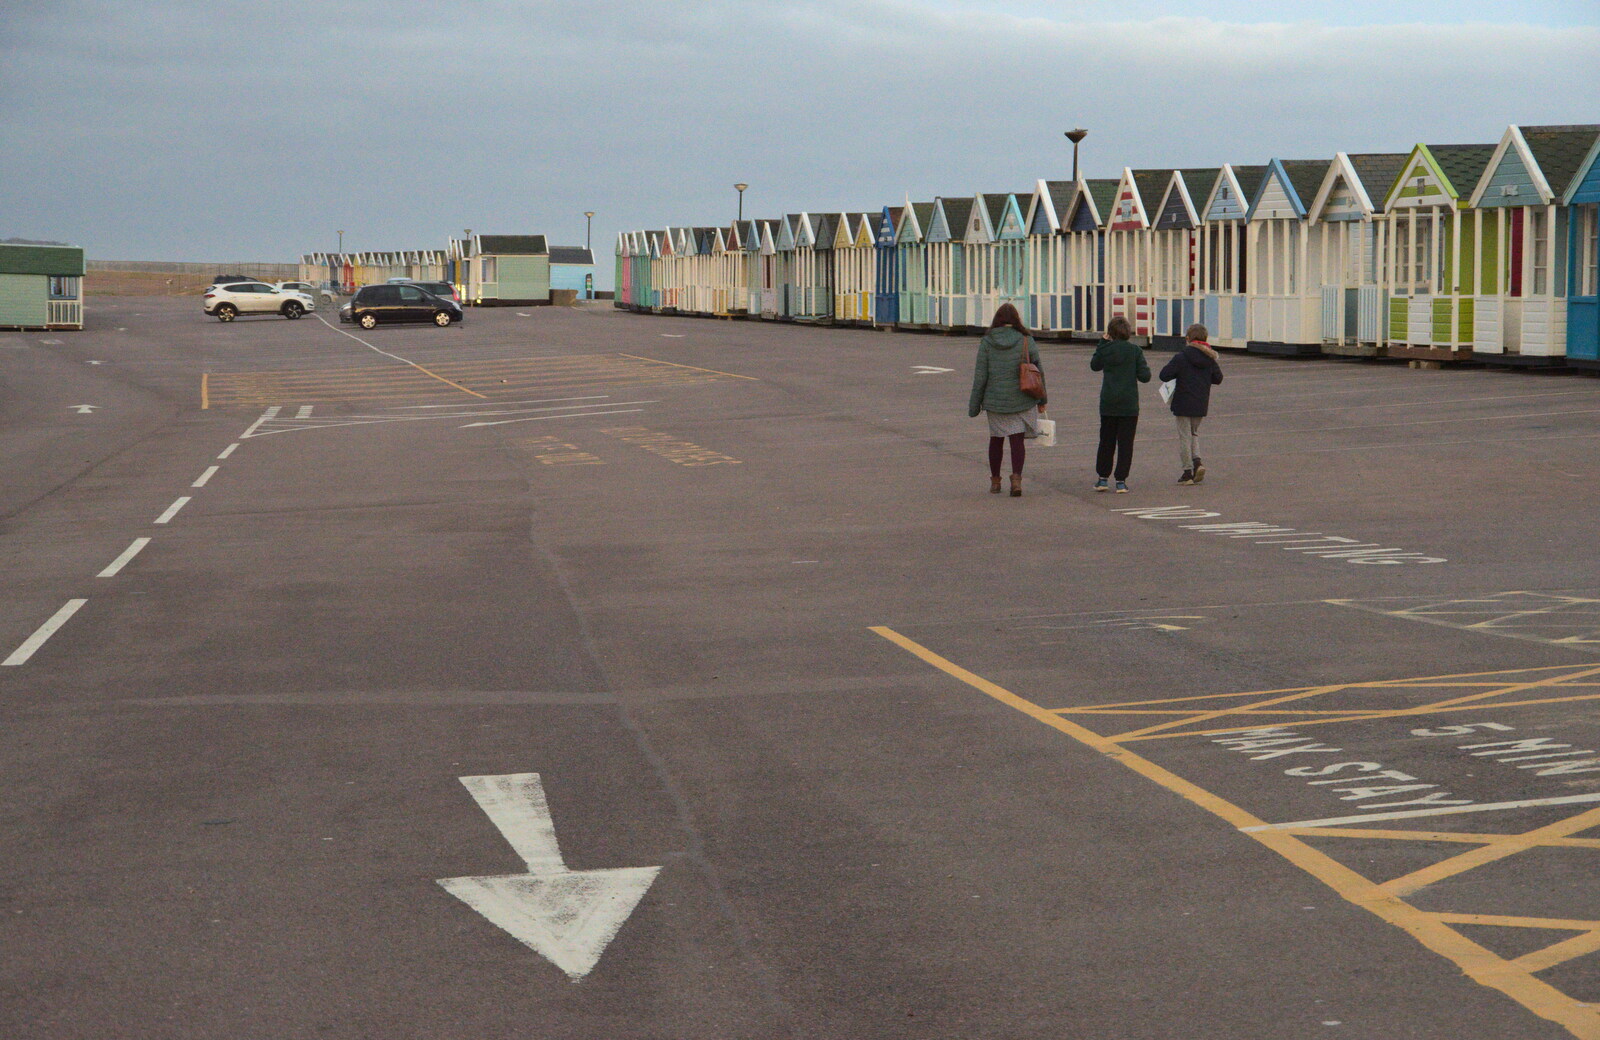 The empty car park from A Return to the Beach, Southwold, Suffolk - 20th December 2020